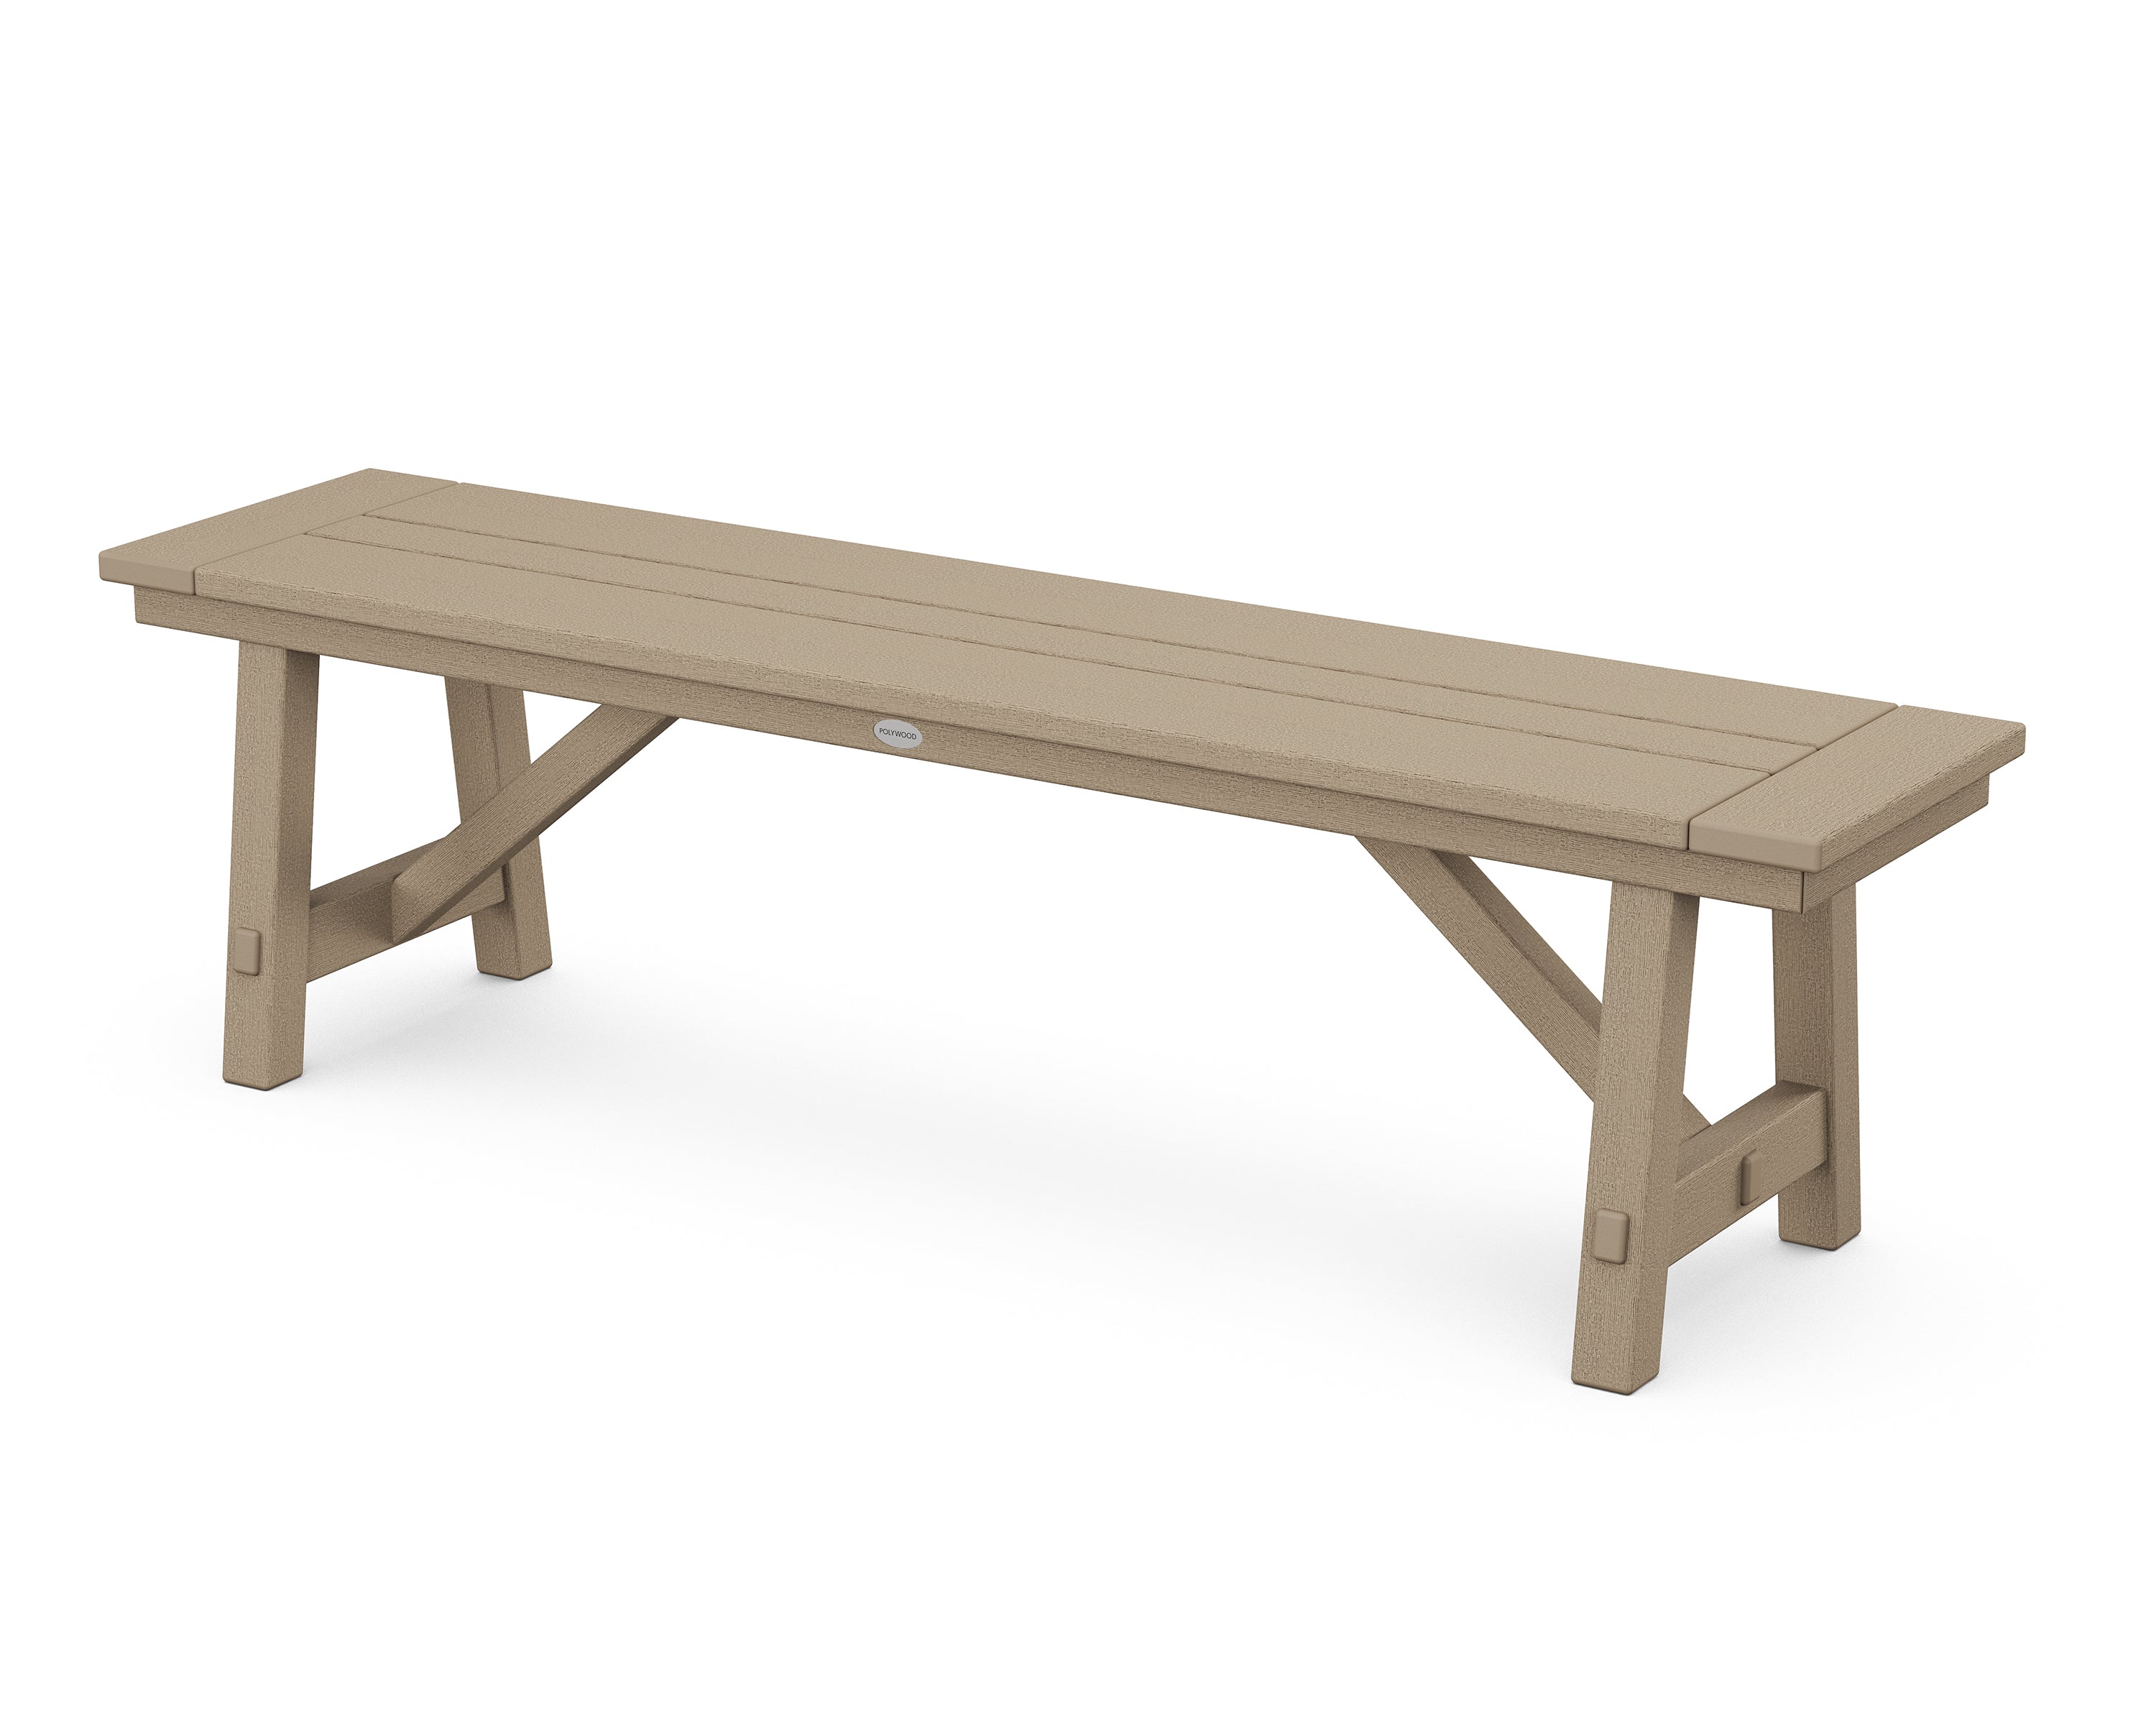 POLYWOOD® Rustic Farmhouse 60" Backless Bench in Vintage Sahara